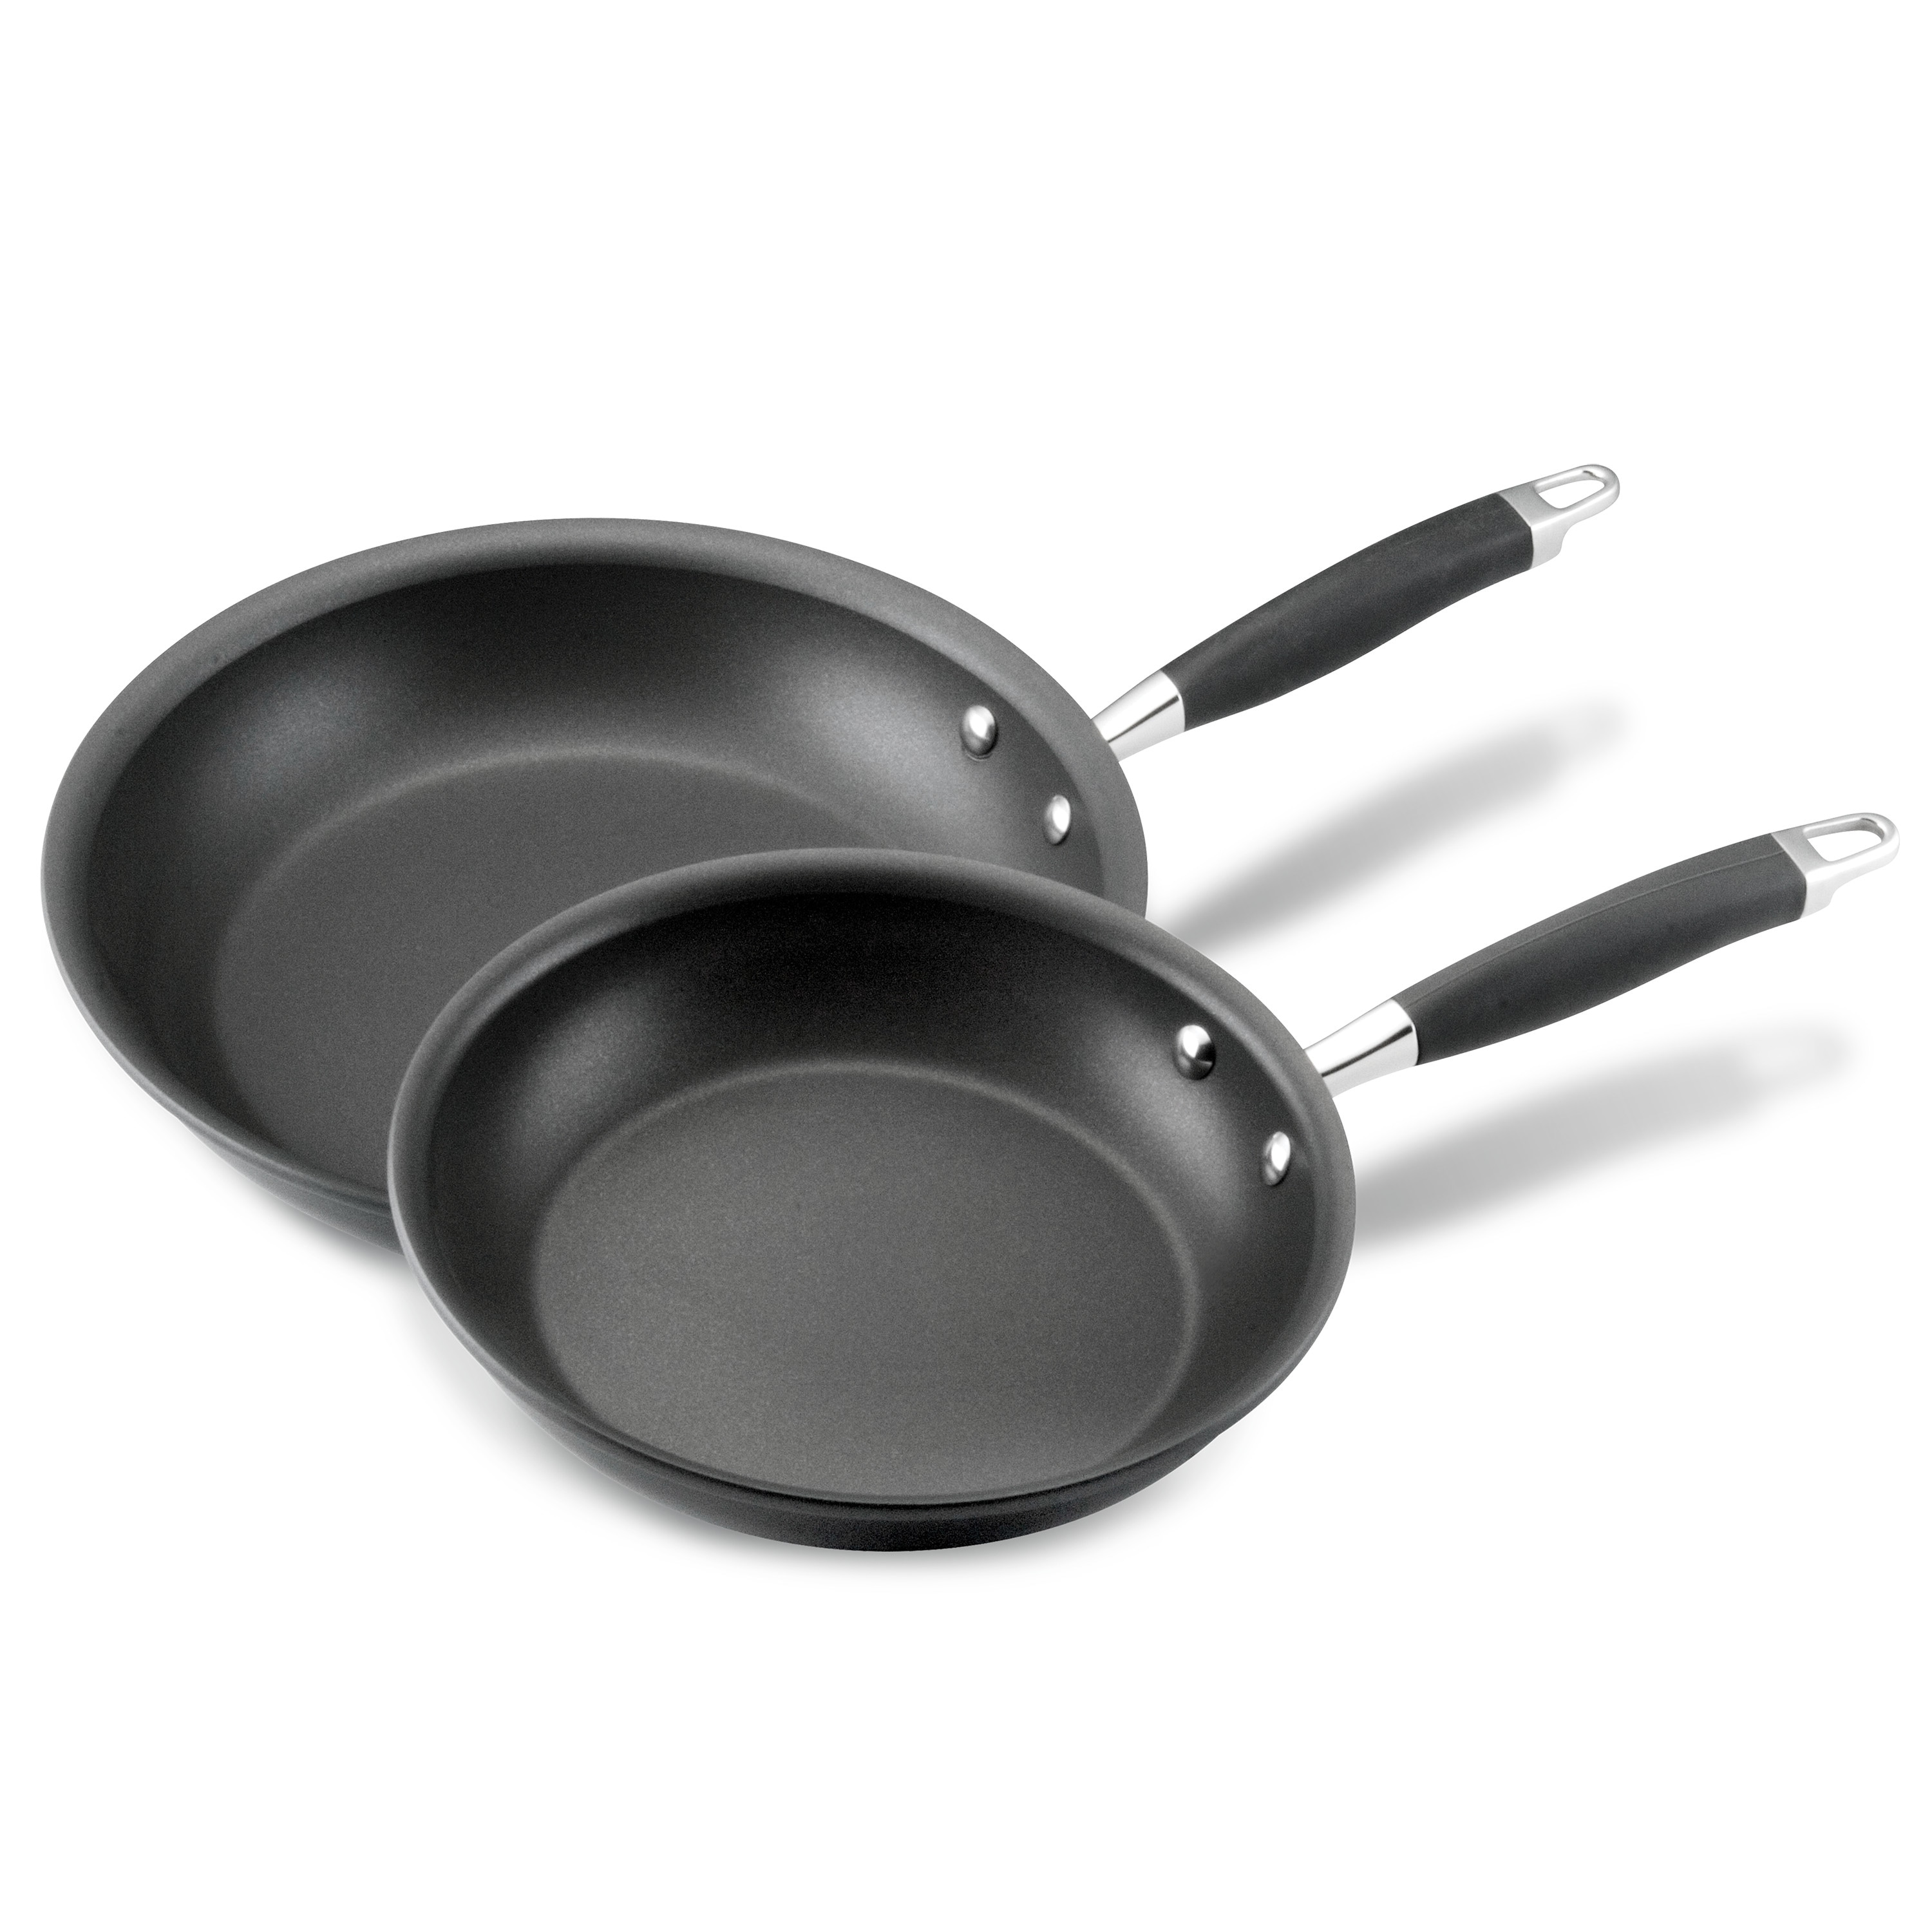 https://ak1.ostkcdn.com/images/products/is/images/direct/89df81cecfa51ce95e0556447a660b785c359899/Anolon-Advanced-Hard-Anodized-Nonstick-Frying-Pan-Set%2C-2-Piece%2C-Gray.jpg